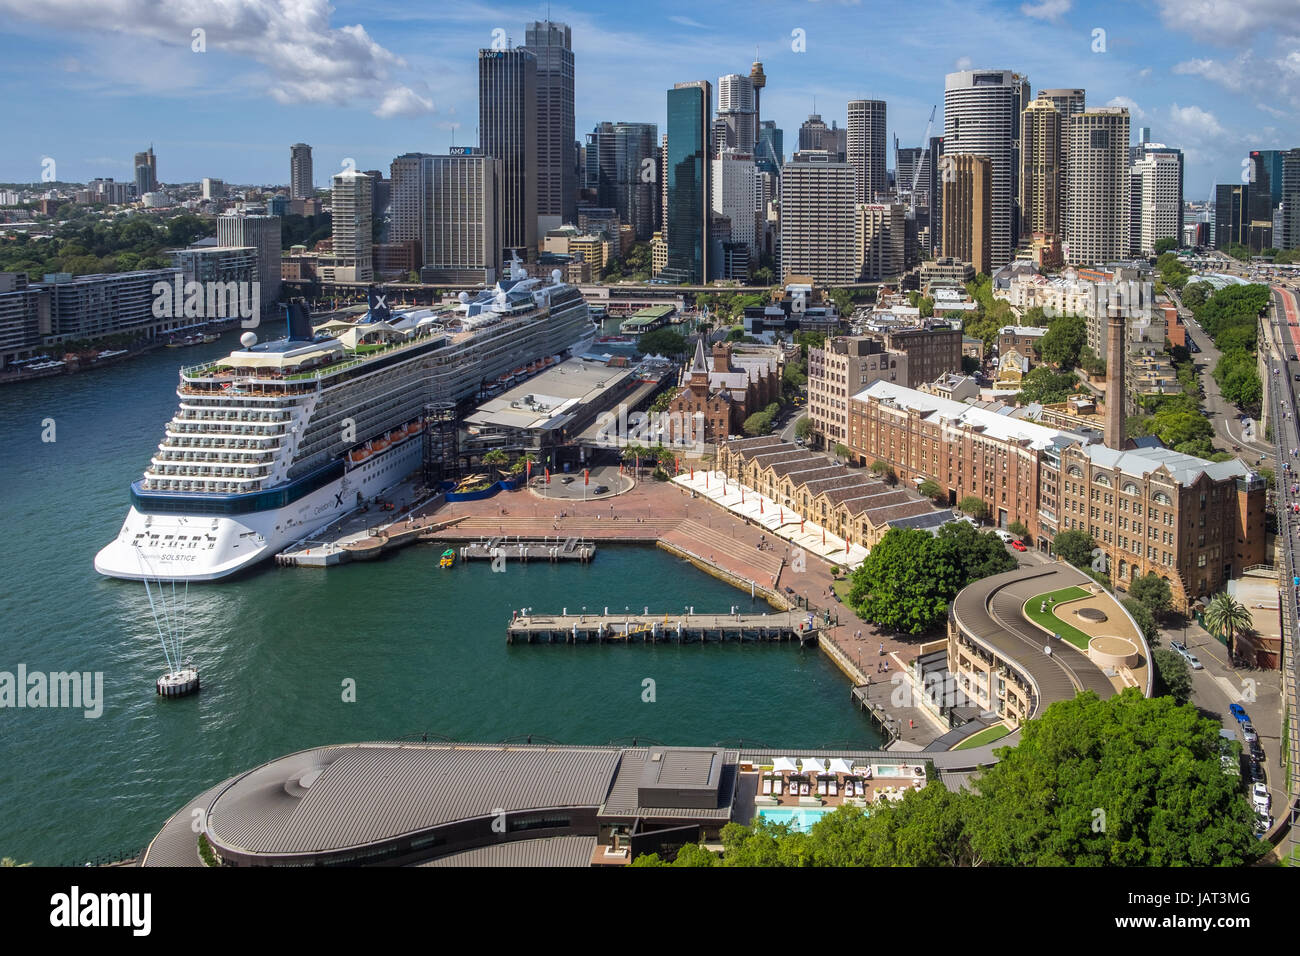 A cruise ship in Sydney Harbour with the city in the background Stock Photo